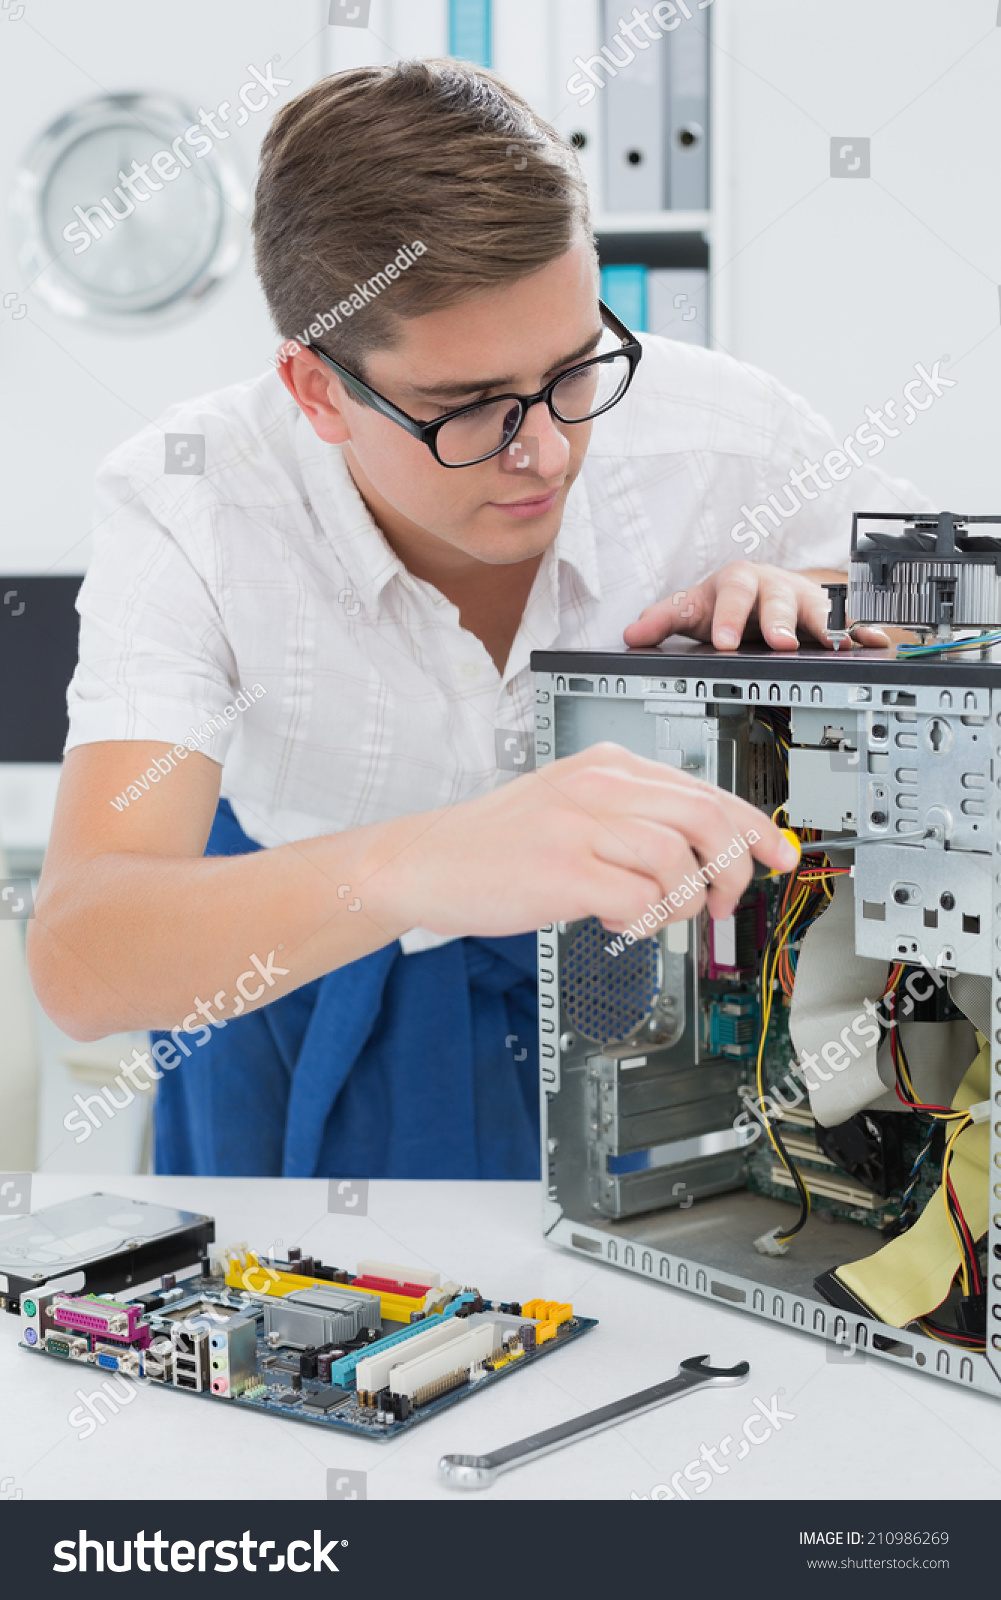 Young technician working on broken computer in his office #210986269